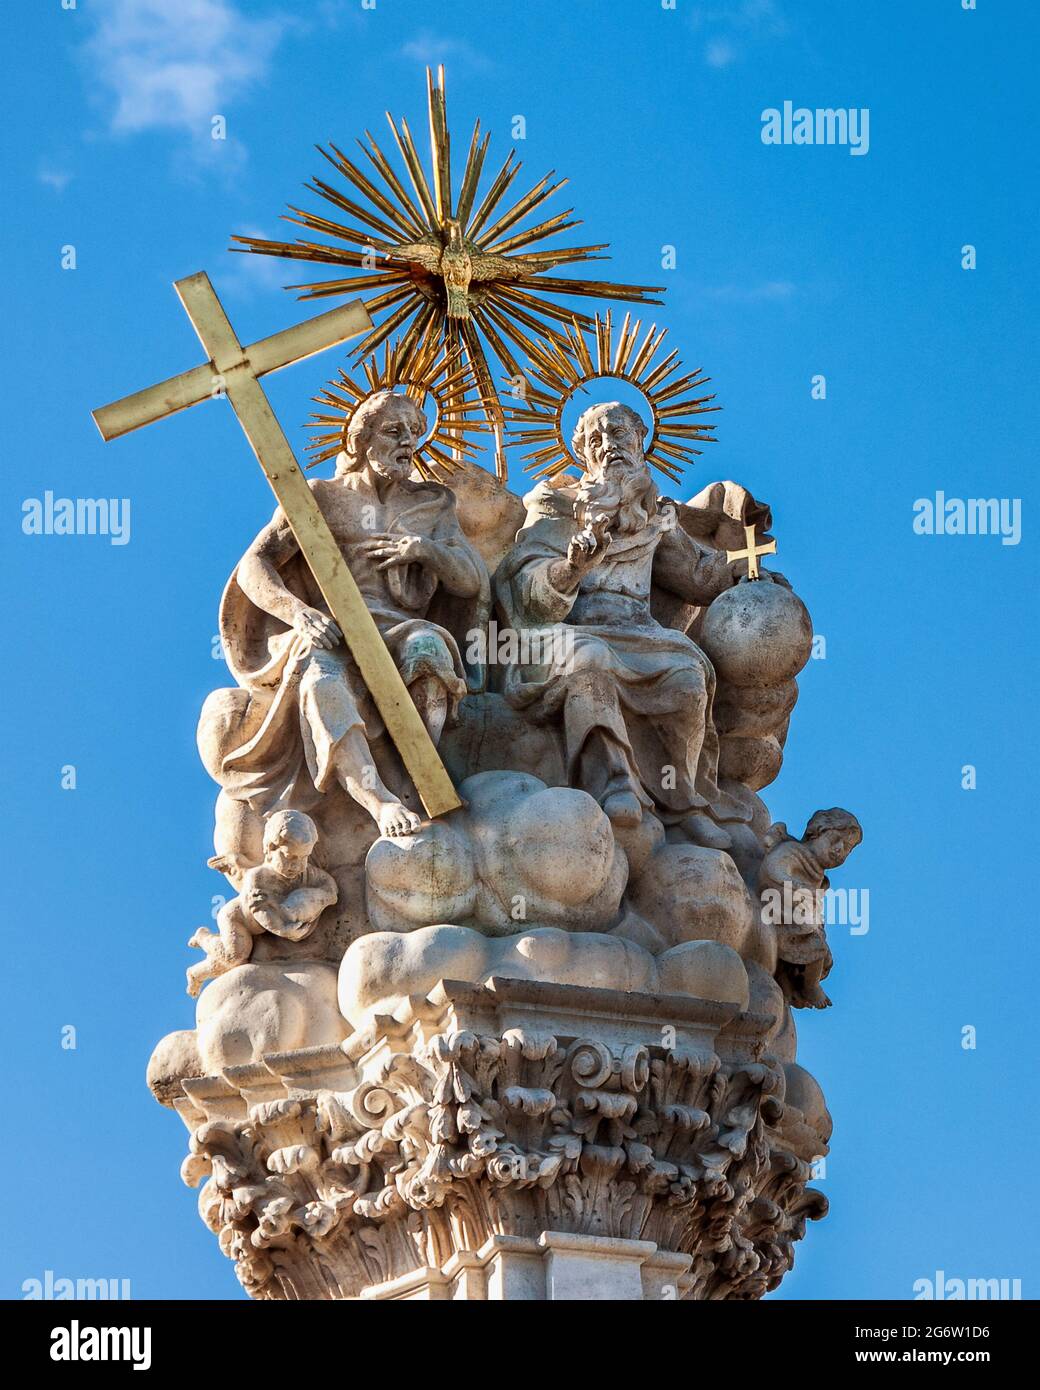 Holy Trinity Doctrine Sculpture, Budapest Statue:  depicts the central belief of Christianity, the Trinity Doctrine. Stock Photo